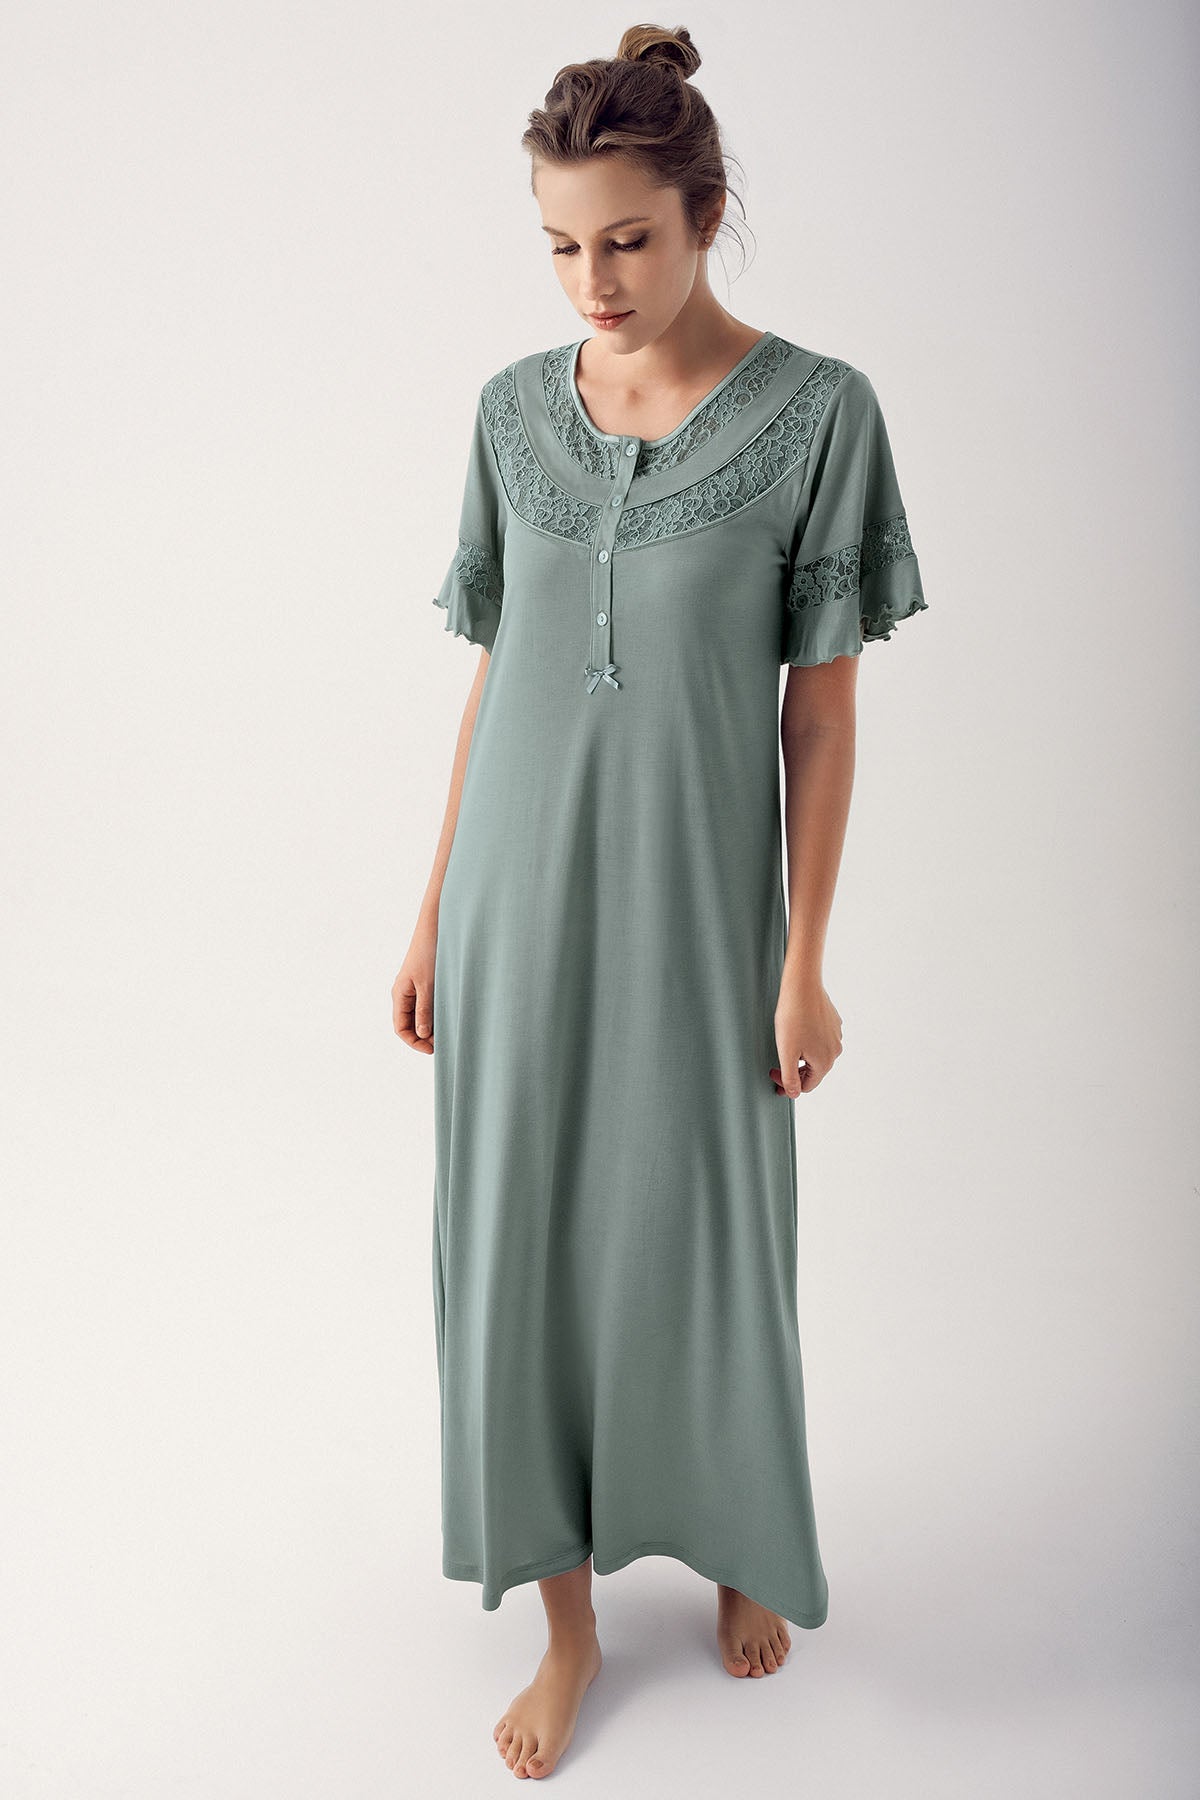 Shopymommy 14107 Guipure Collar Plus Size Maternity & Nursing Nightgown Green